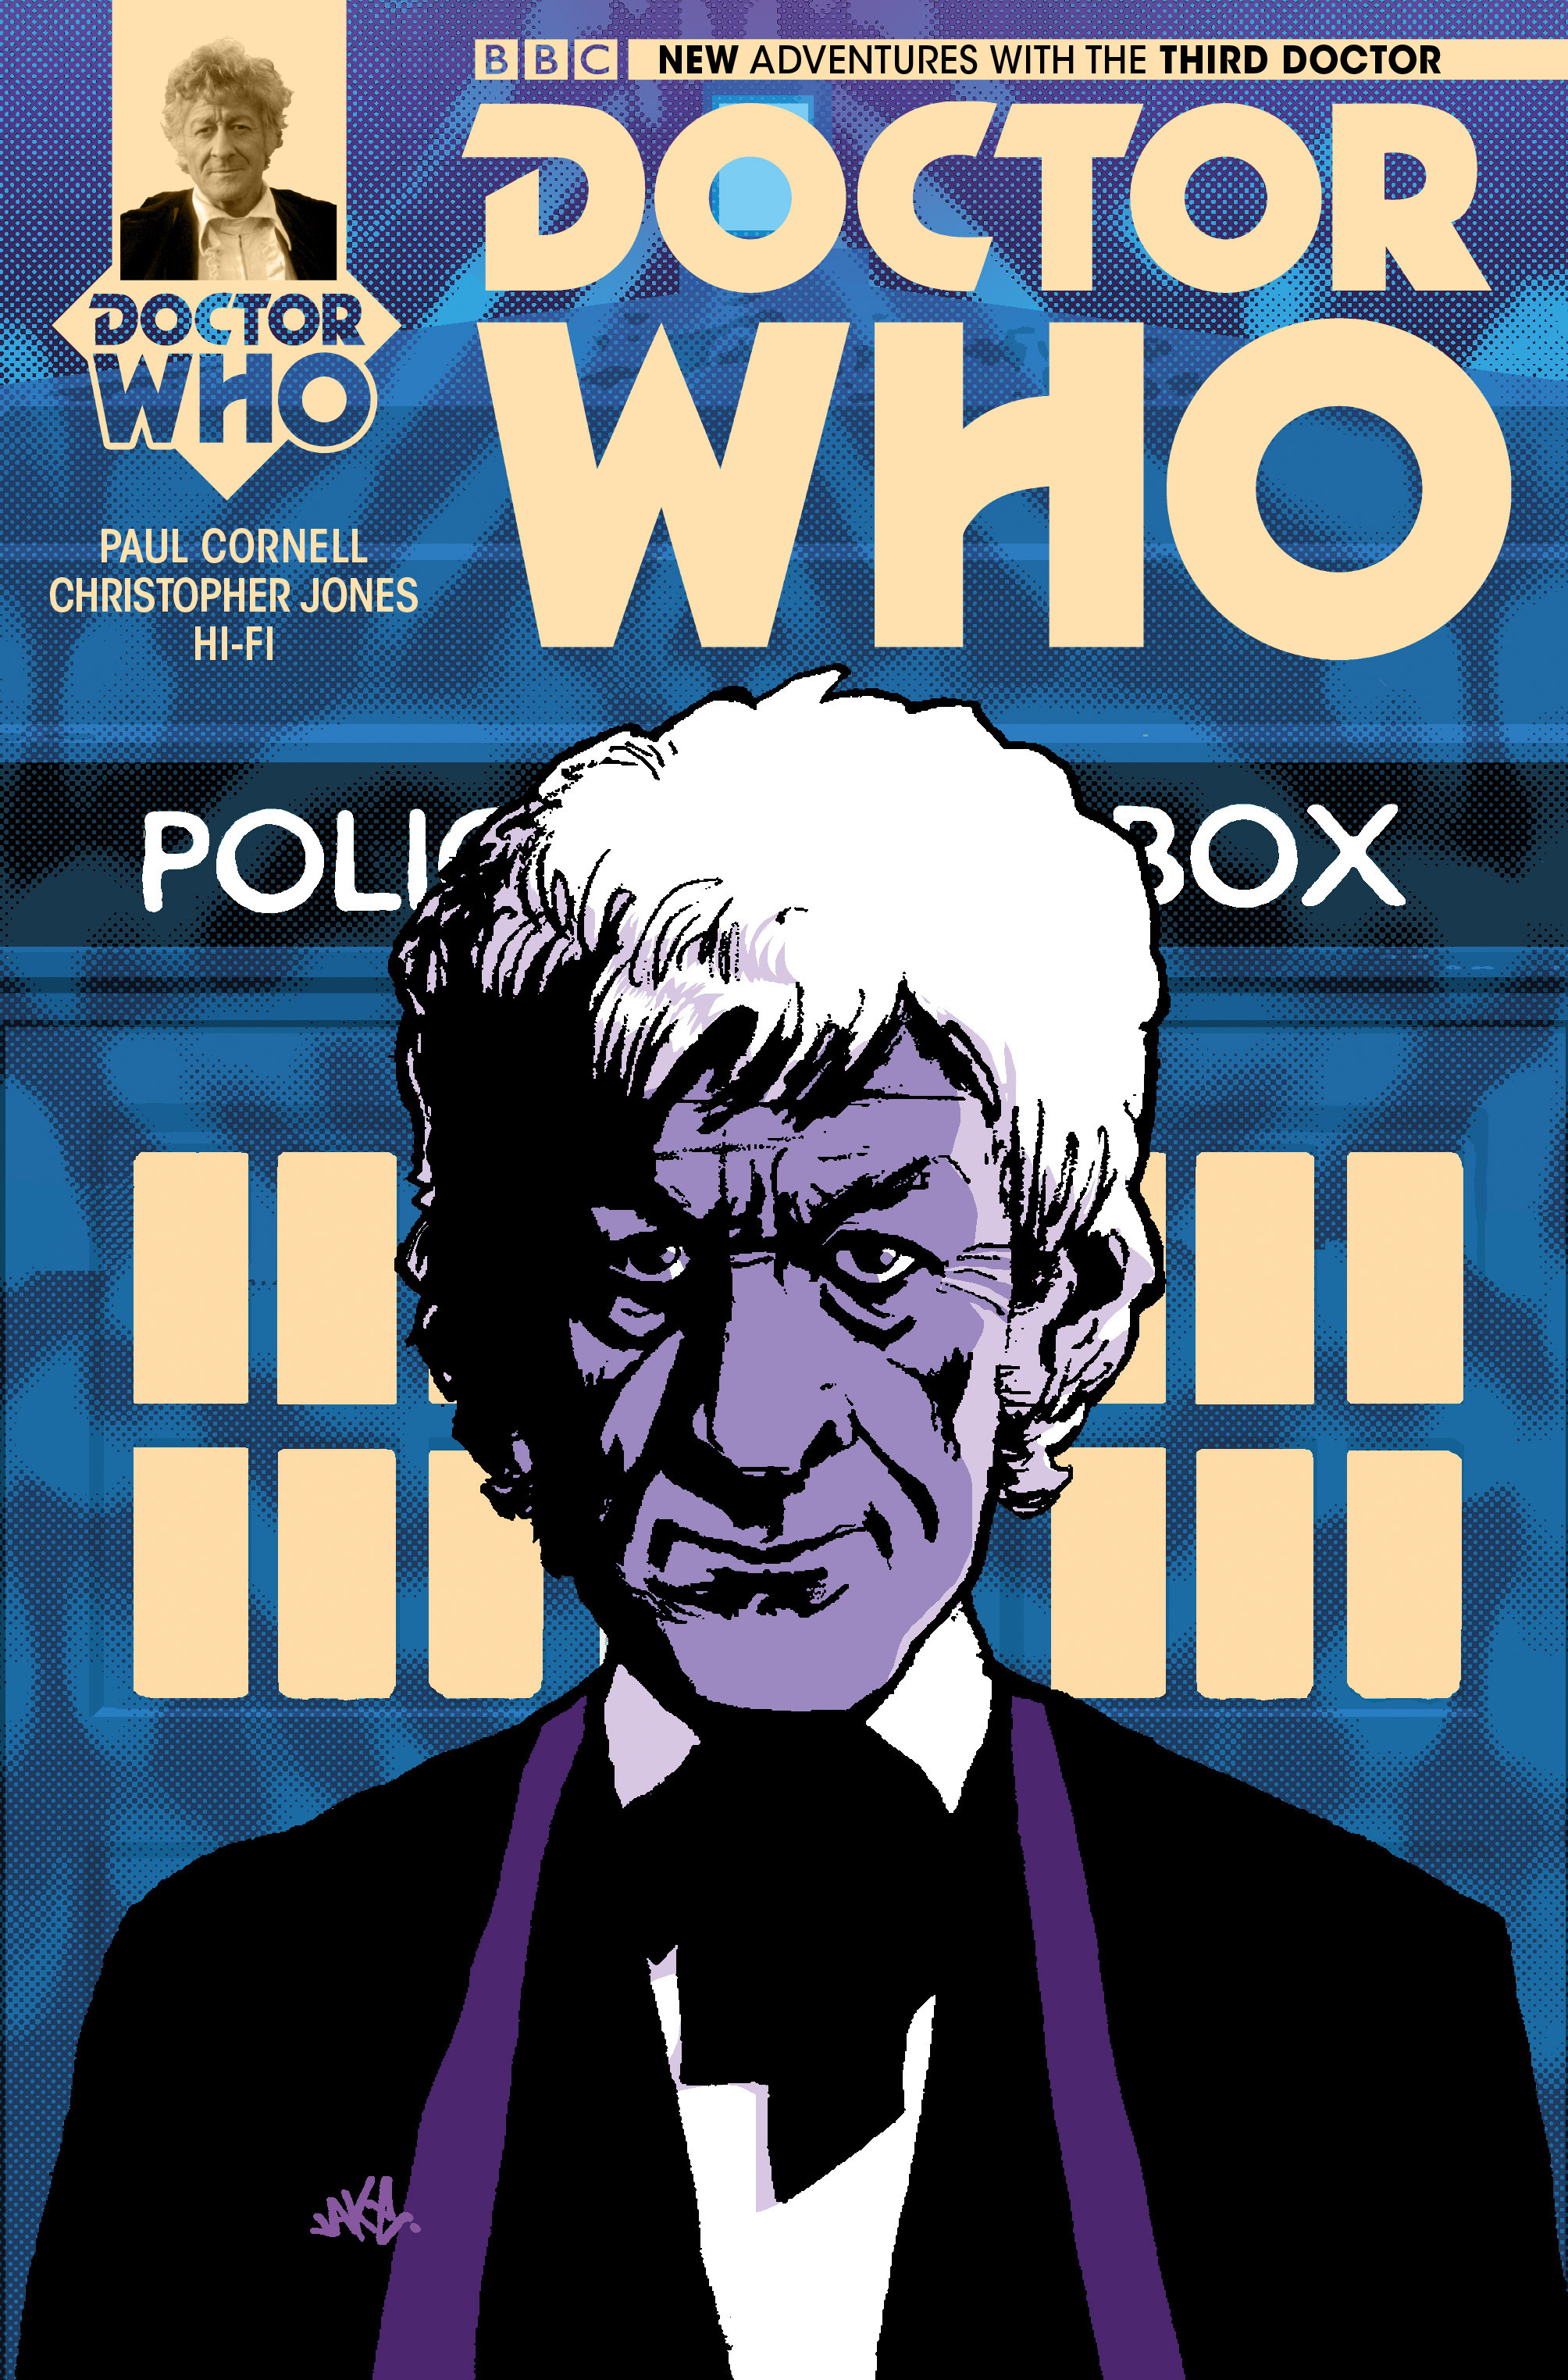 Read online Doctor Who: The Third Doctor comic -  Issue #2 - 3